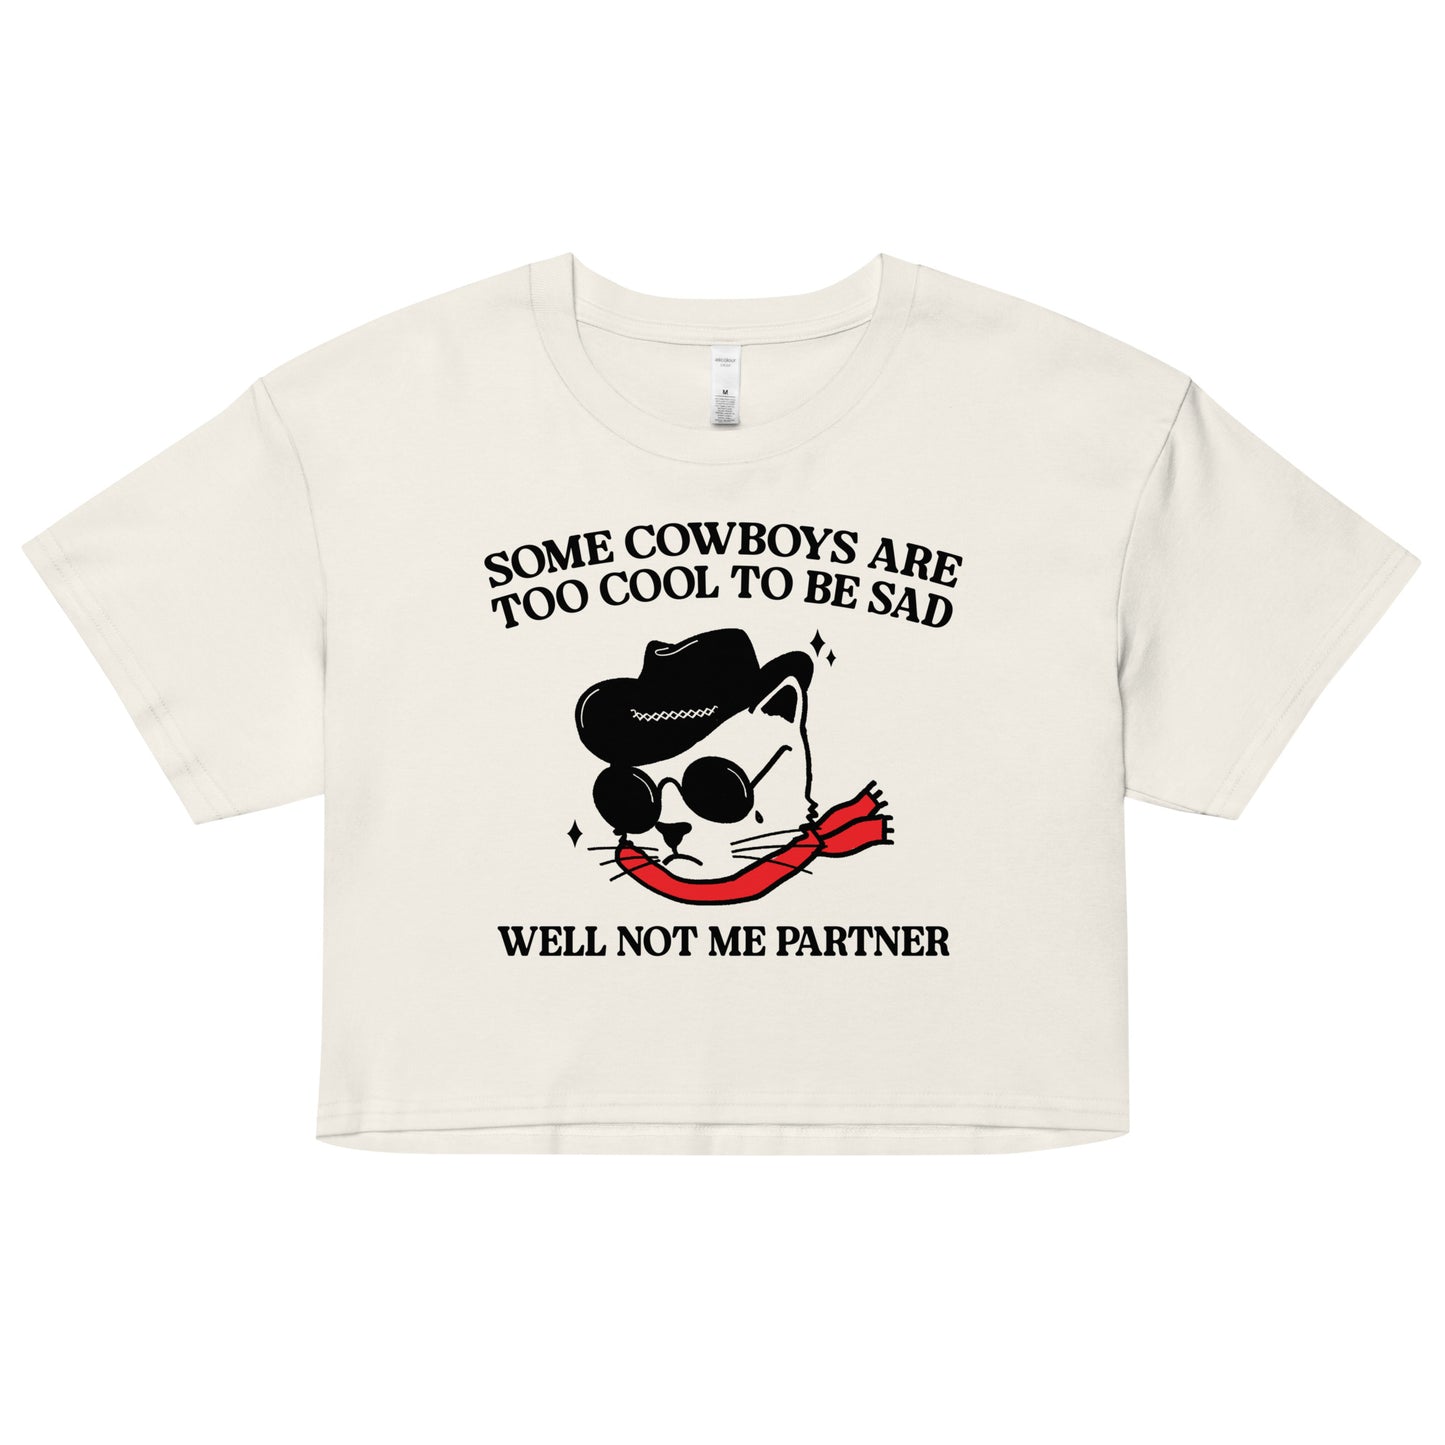 Some Cowboys Are Too Cool to be Sad crop top